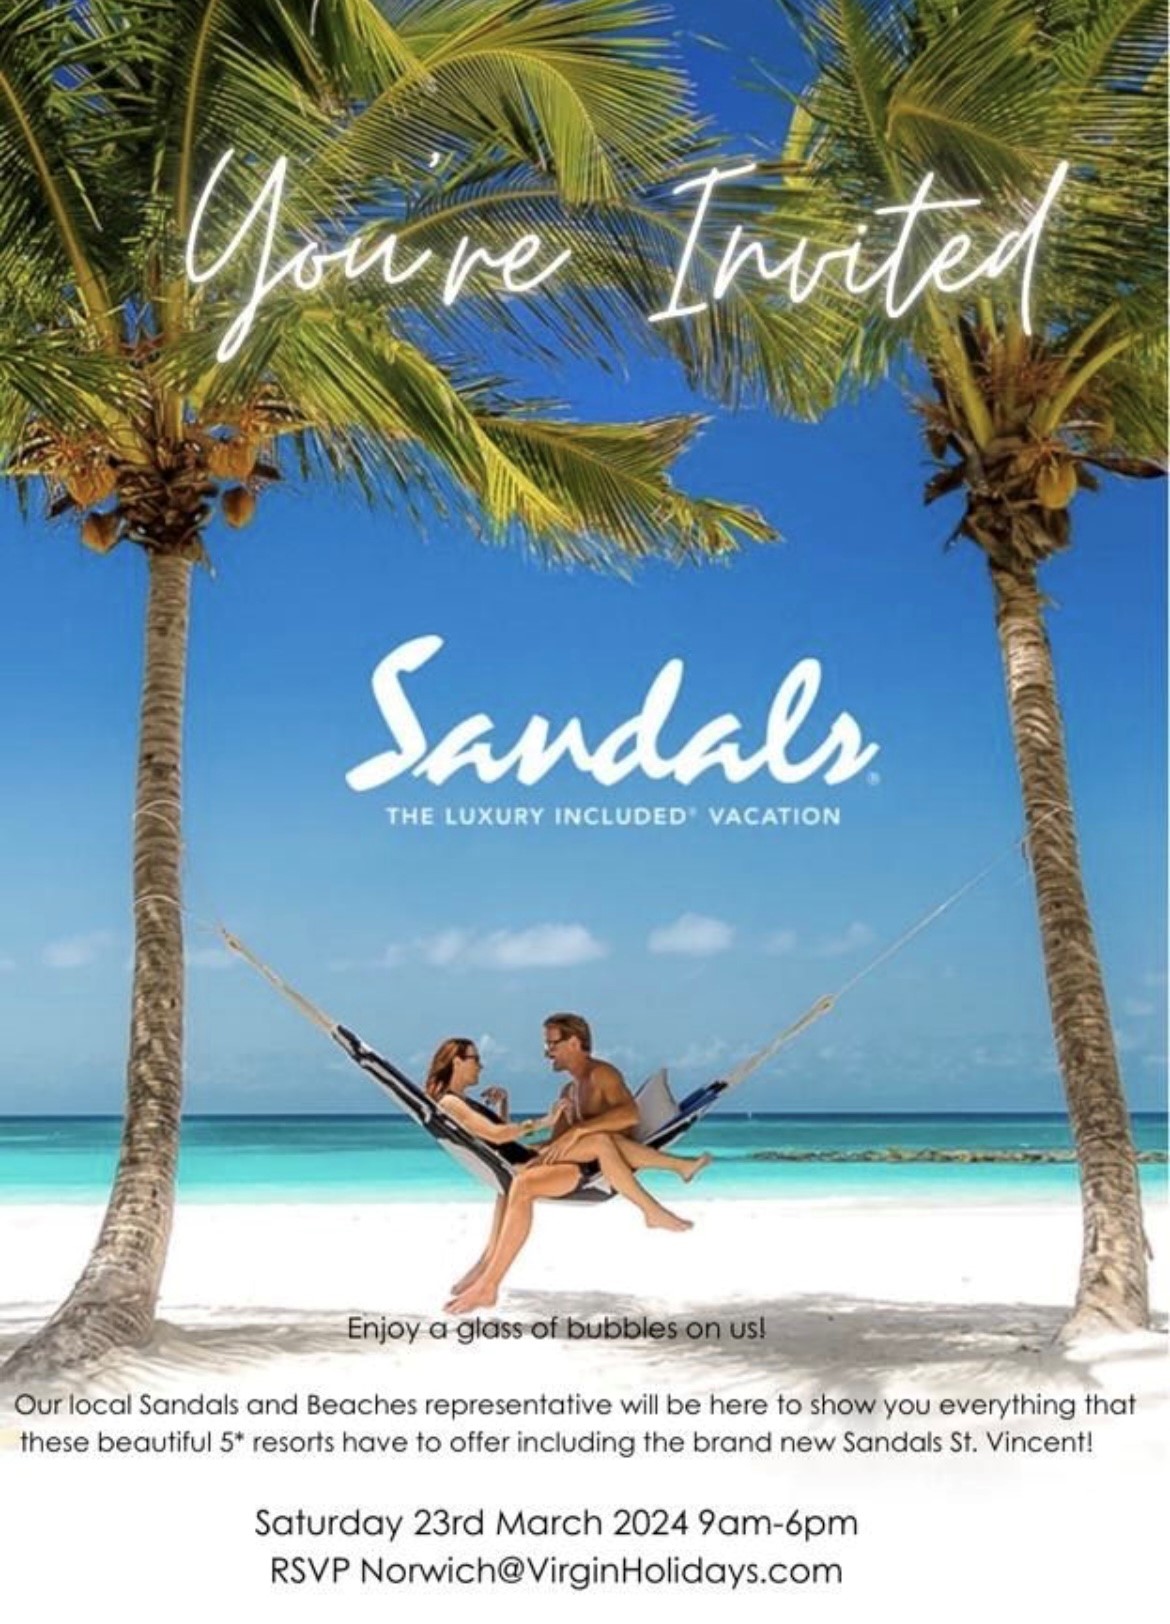 About Sandals® Resorts: The History, Brands & People